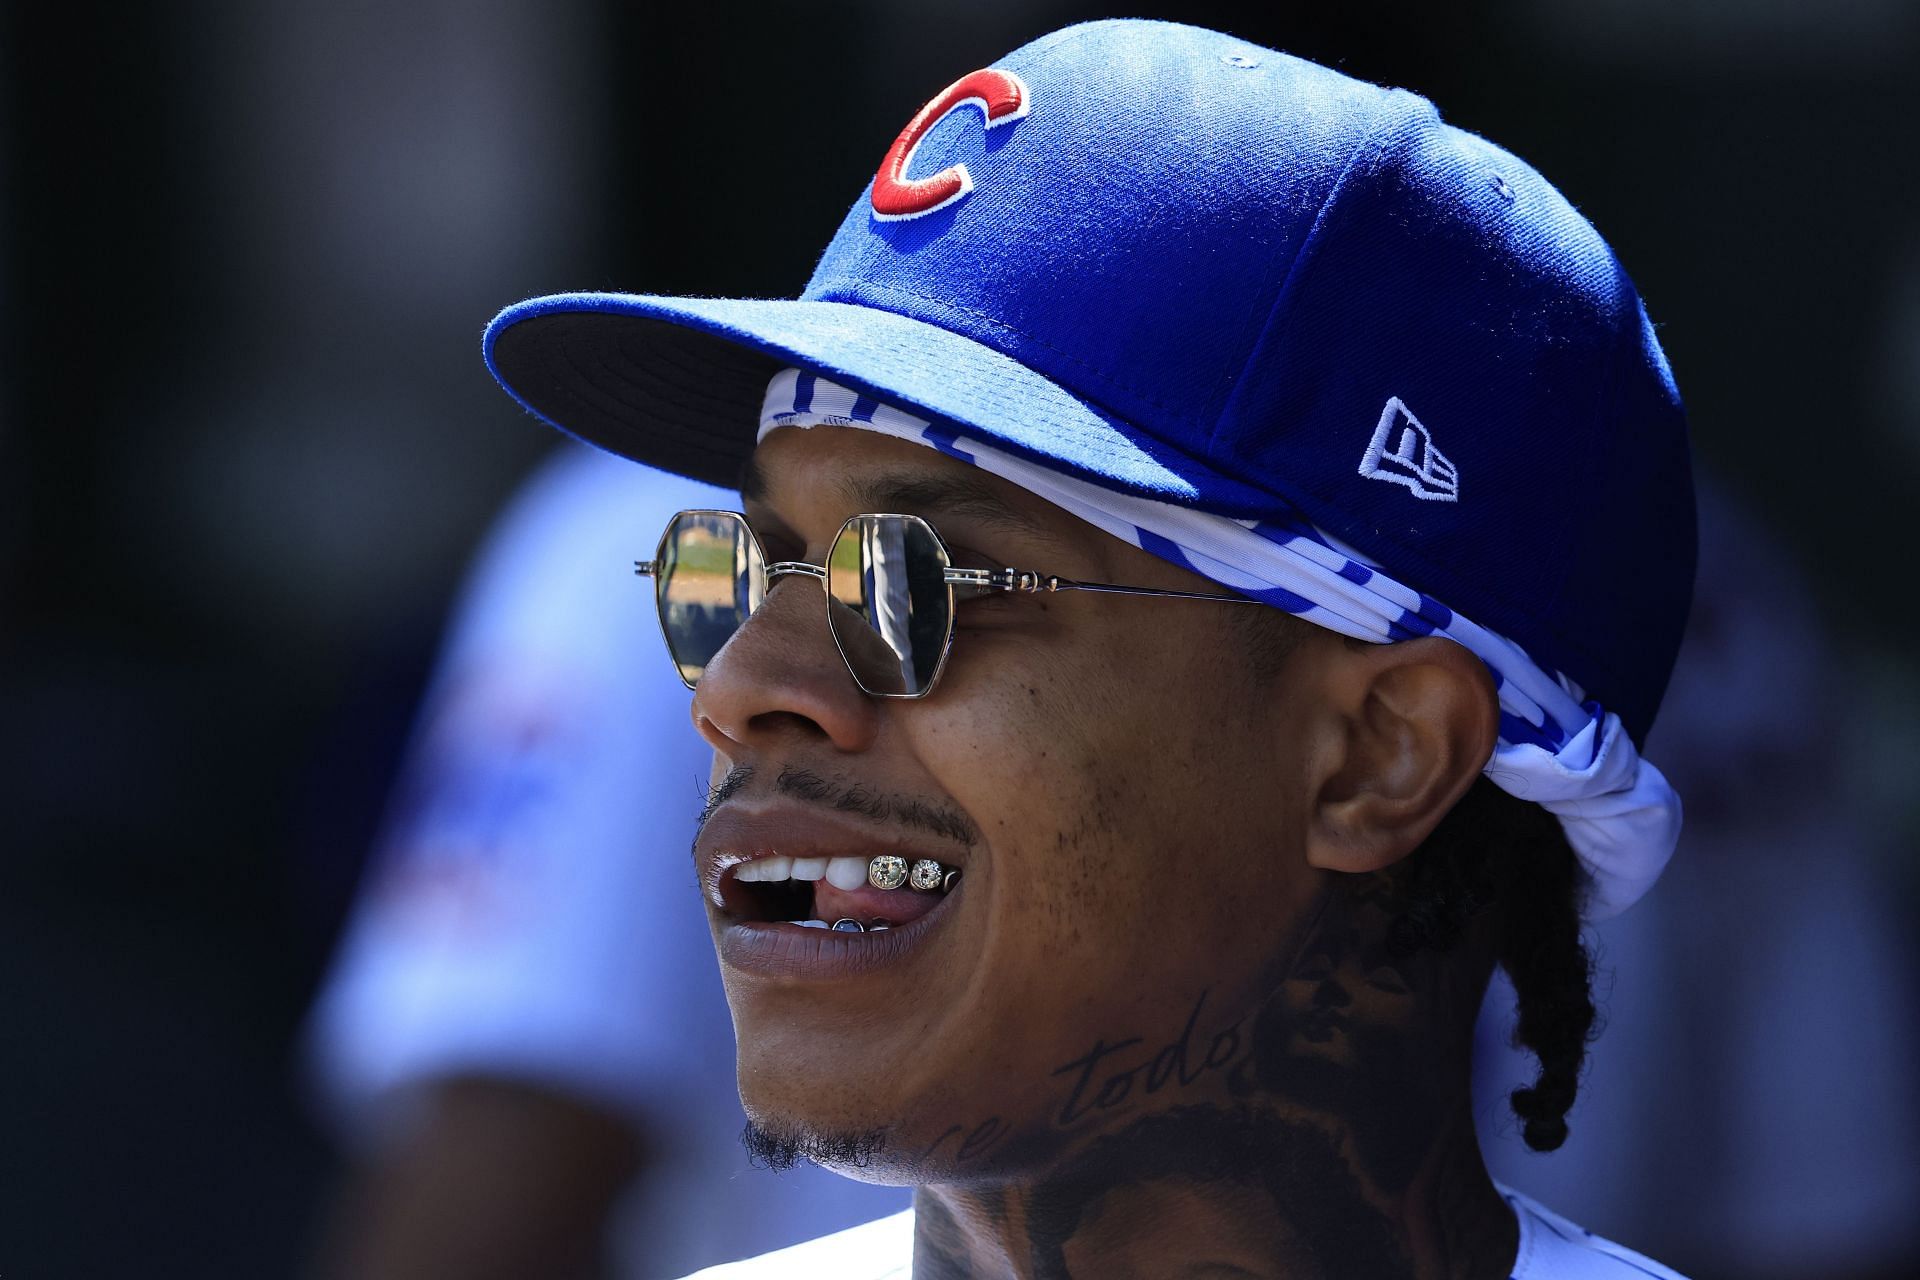 Marcus Stroman of the Chicago Cubs in the dugout before the start of the game against the Miami Marlins at Wrigley Field